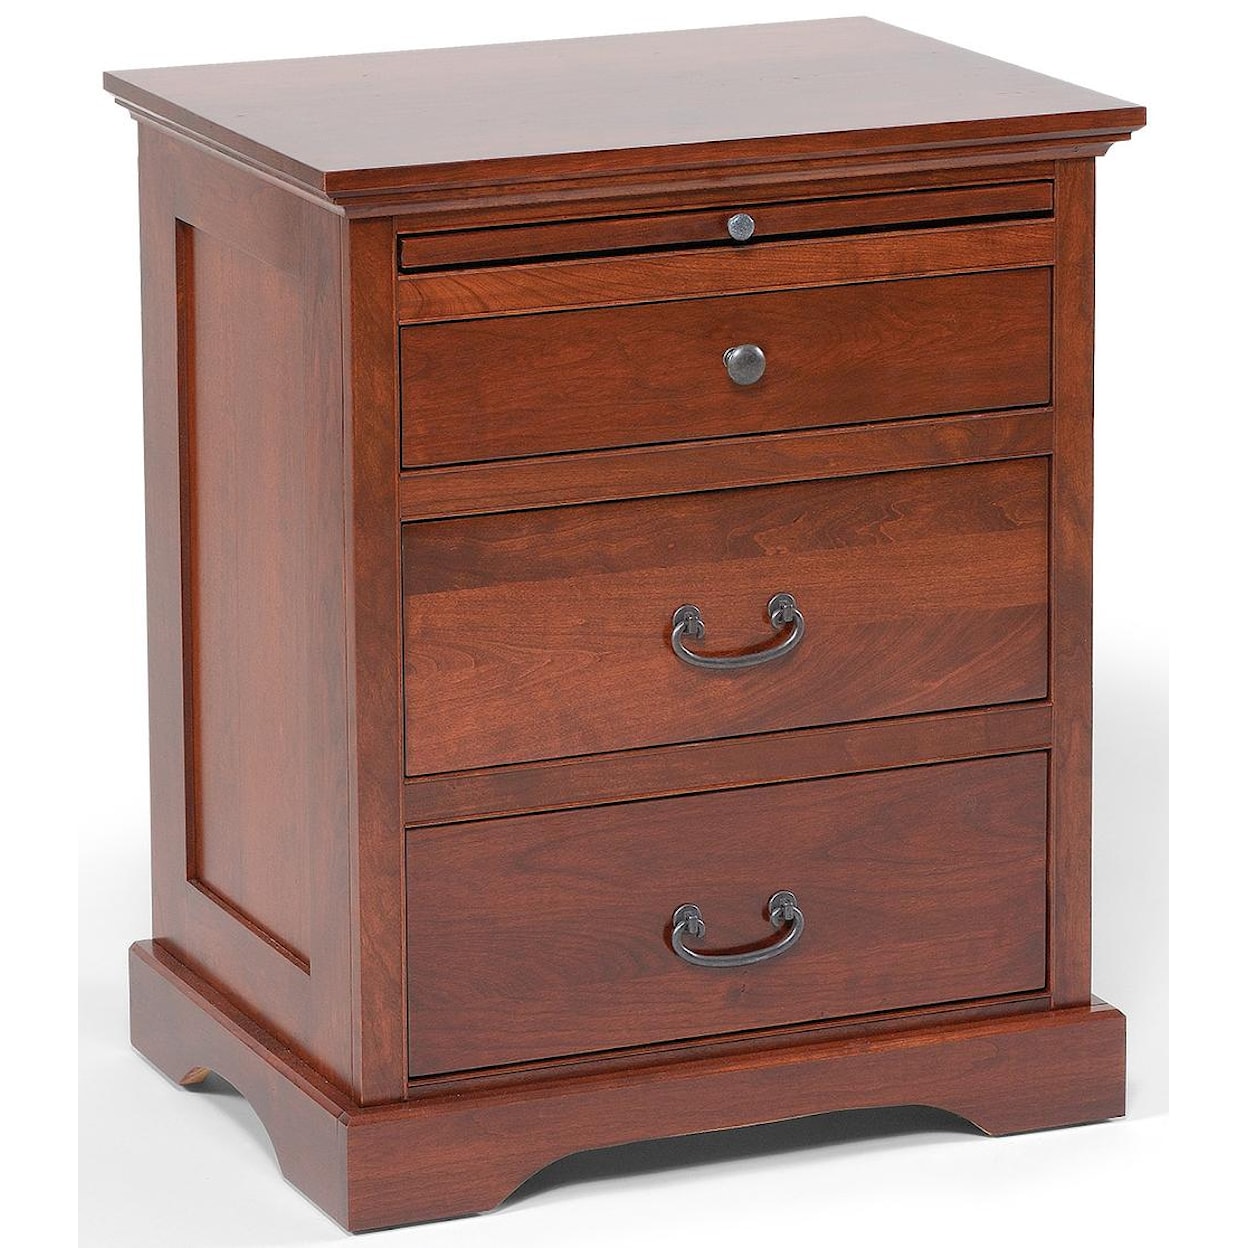 Daniels Amish Elegance 3-Drawer Nightstand with Pullout Shelf